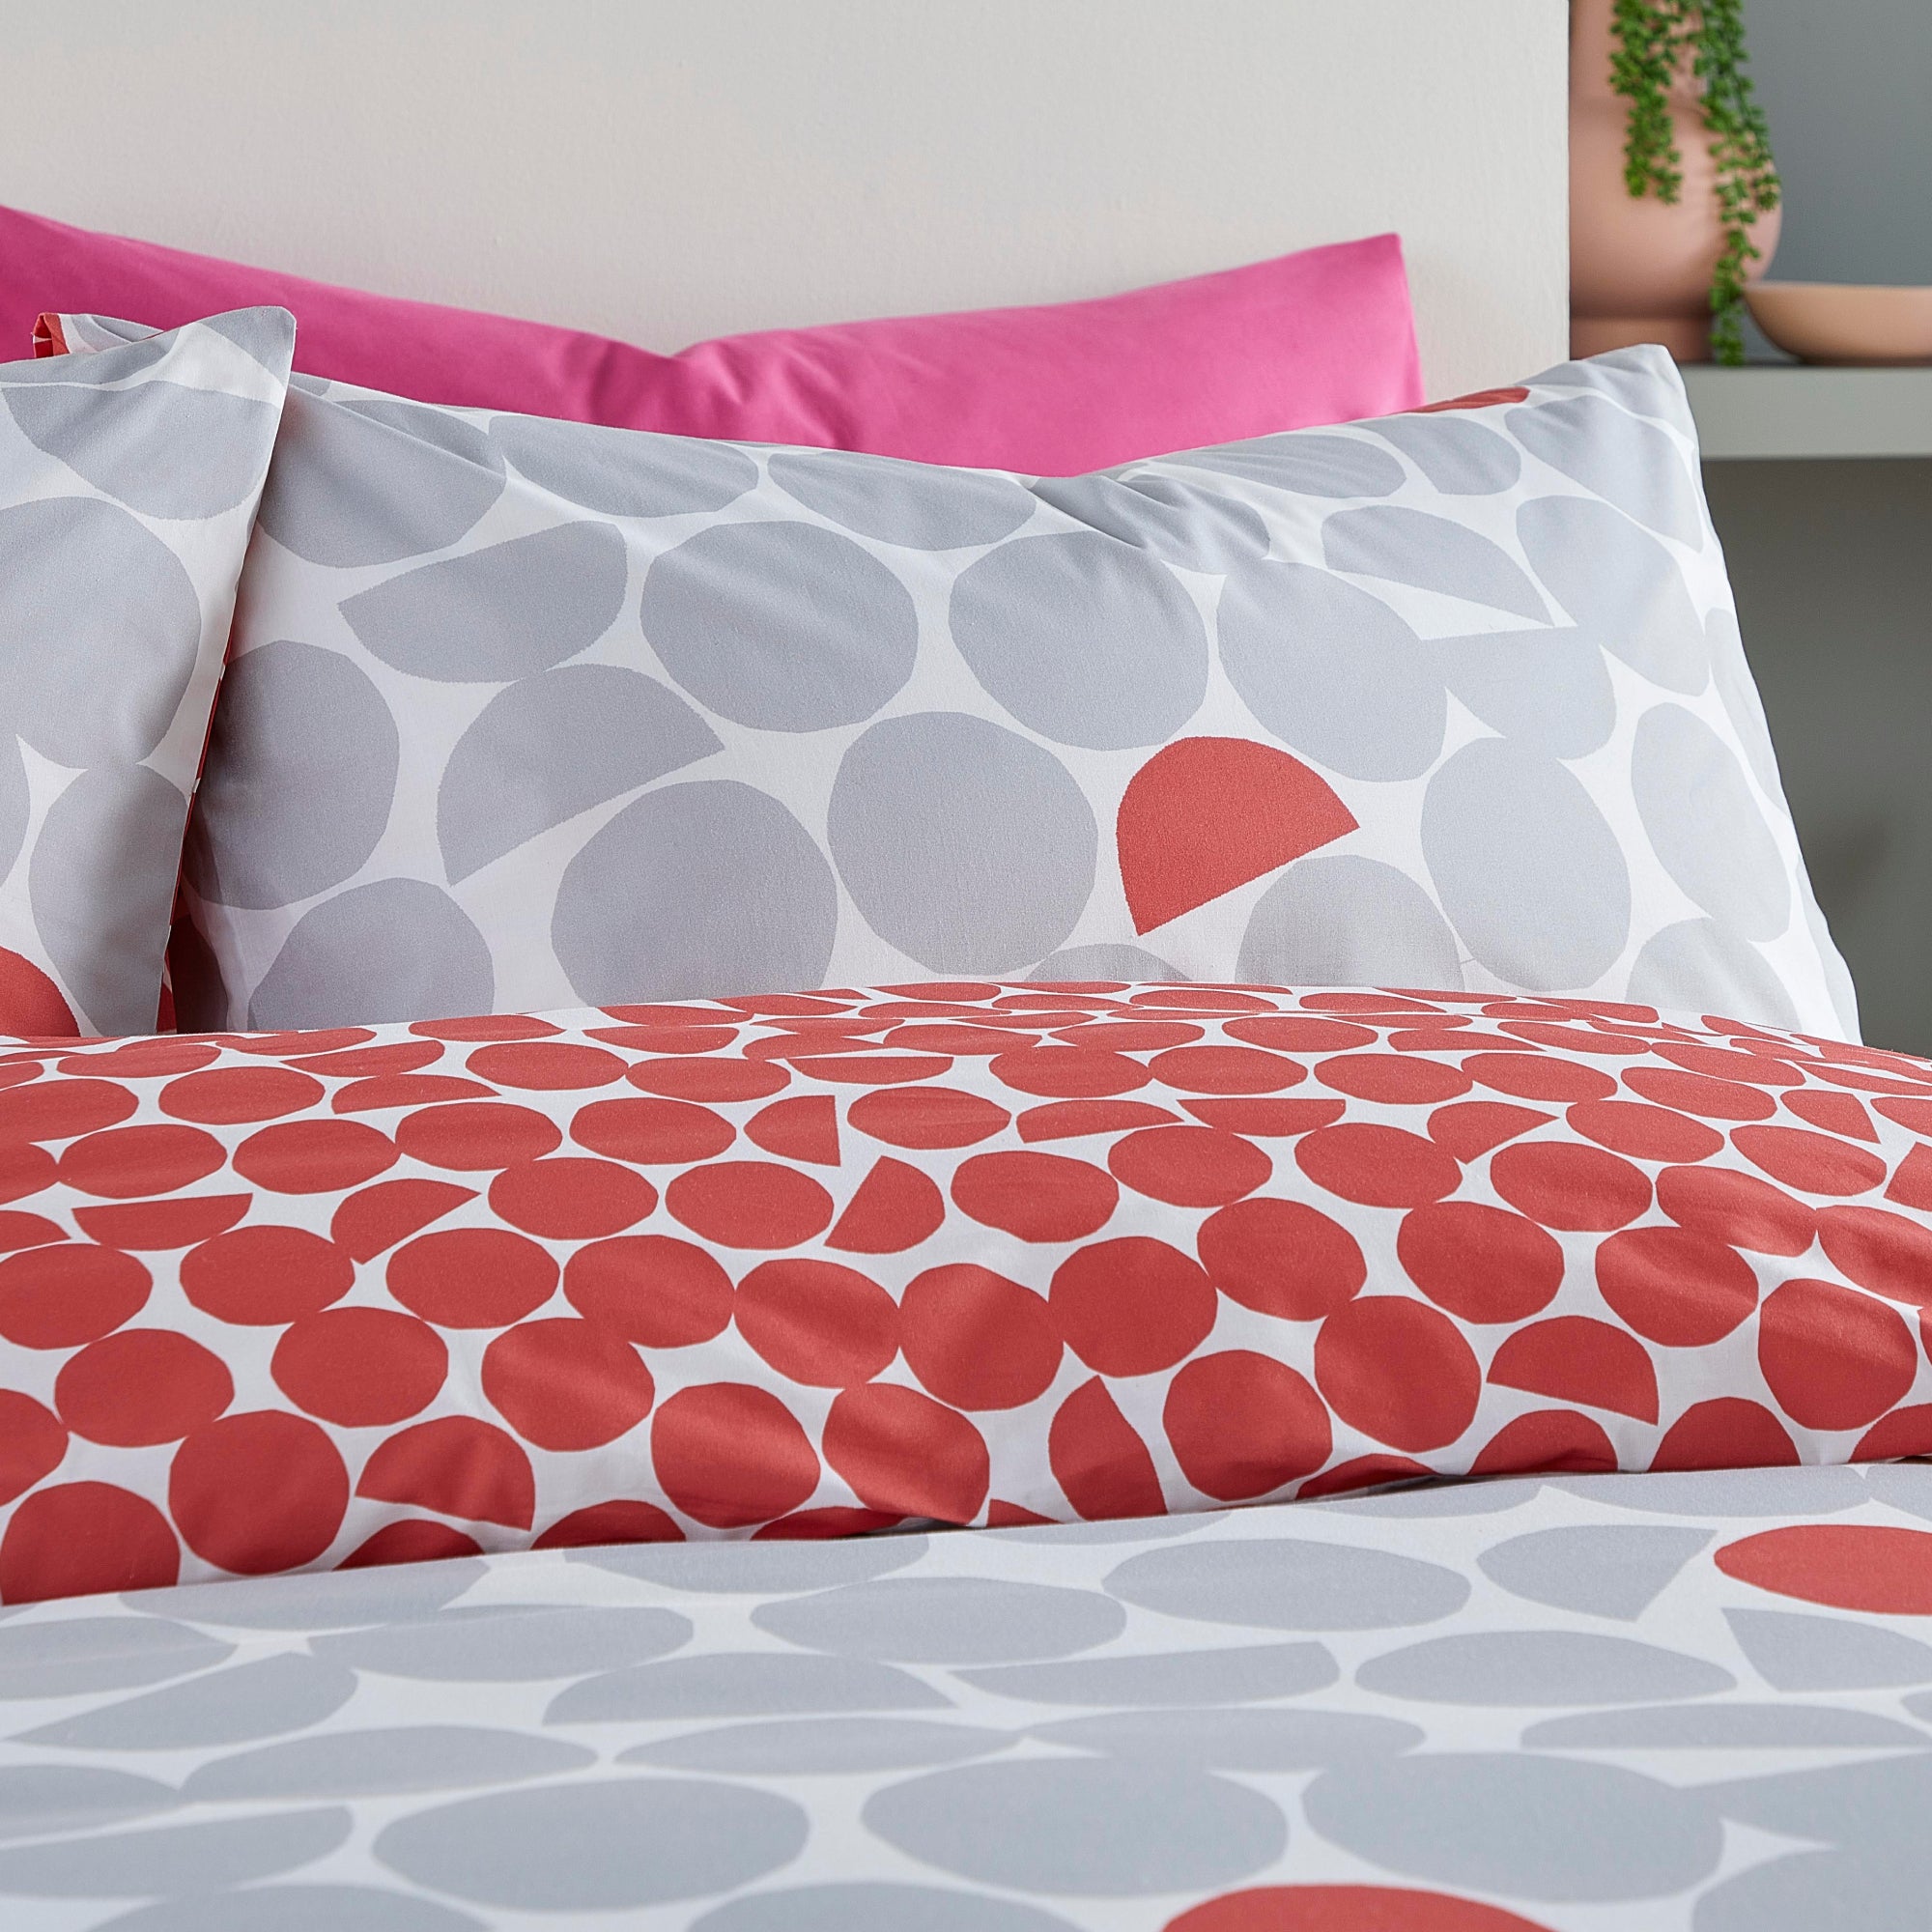 Duvet Cover Set Ingo by Fusion in Pink